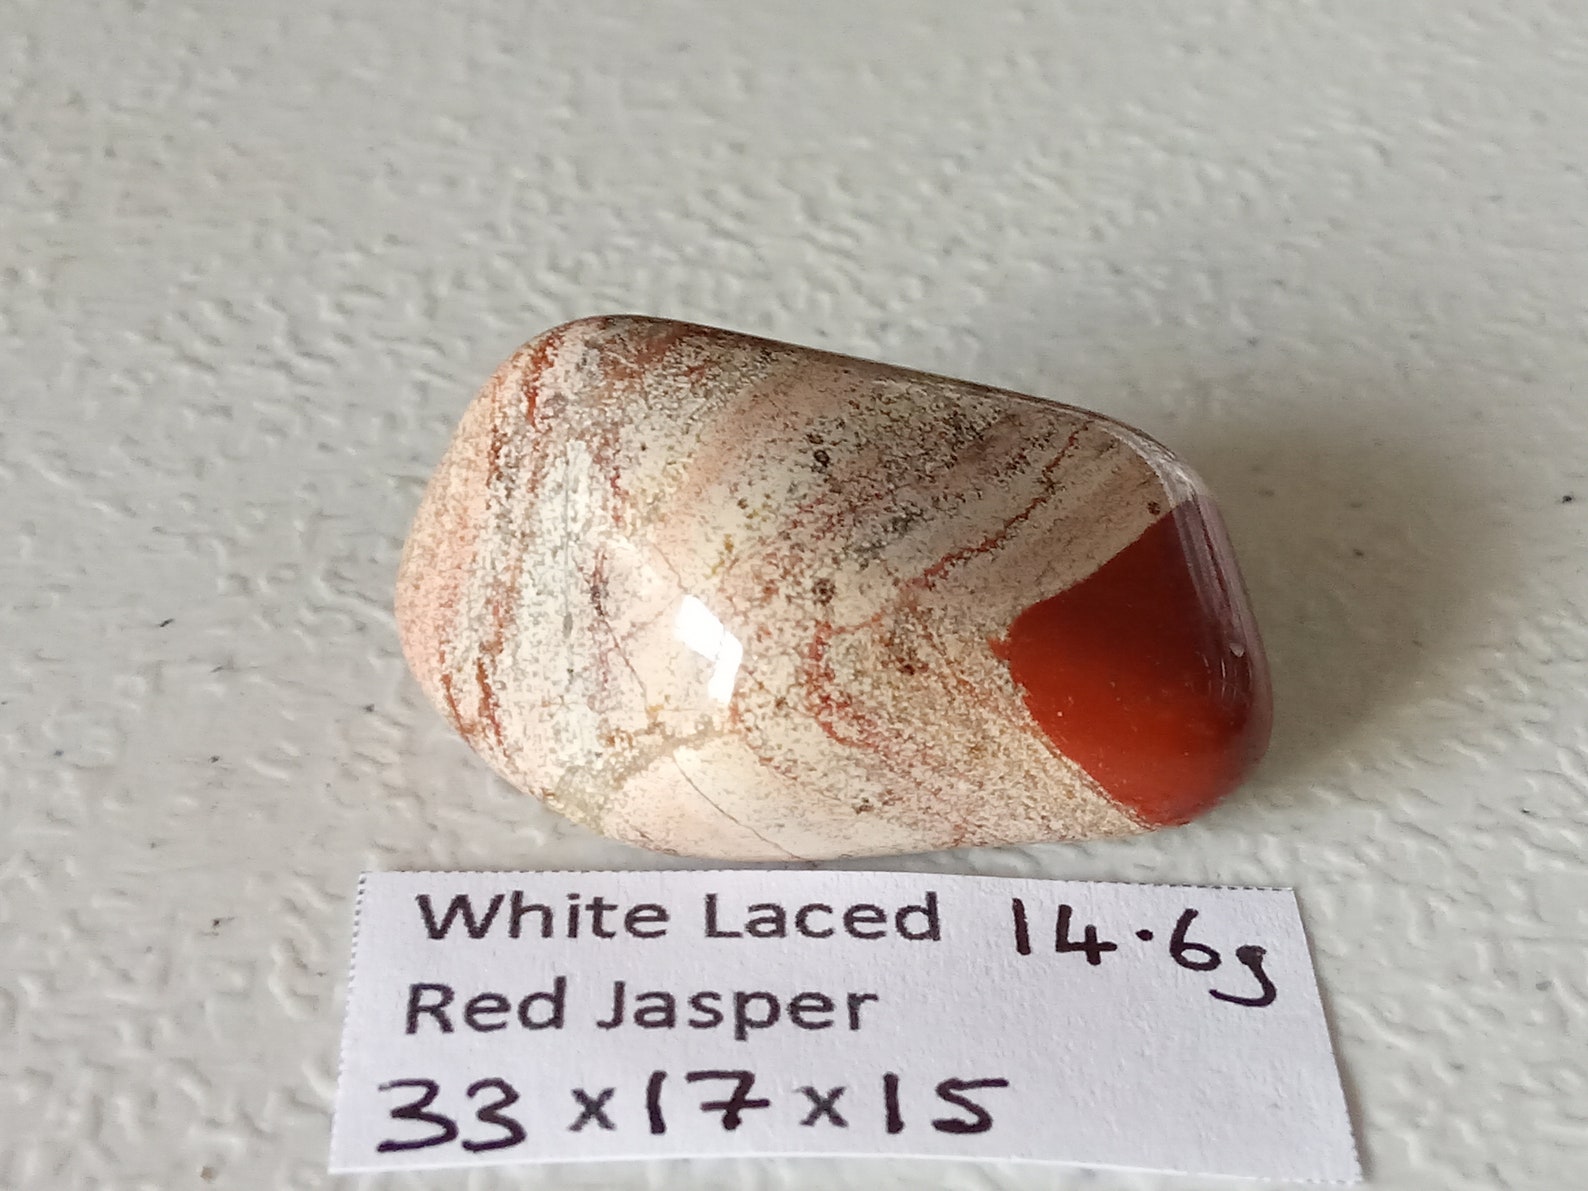 14.6g 100 NATURAL WHITE Laced Red Jasper polished tumbled Etsy